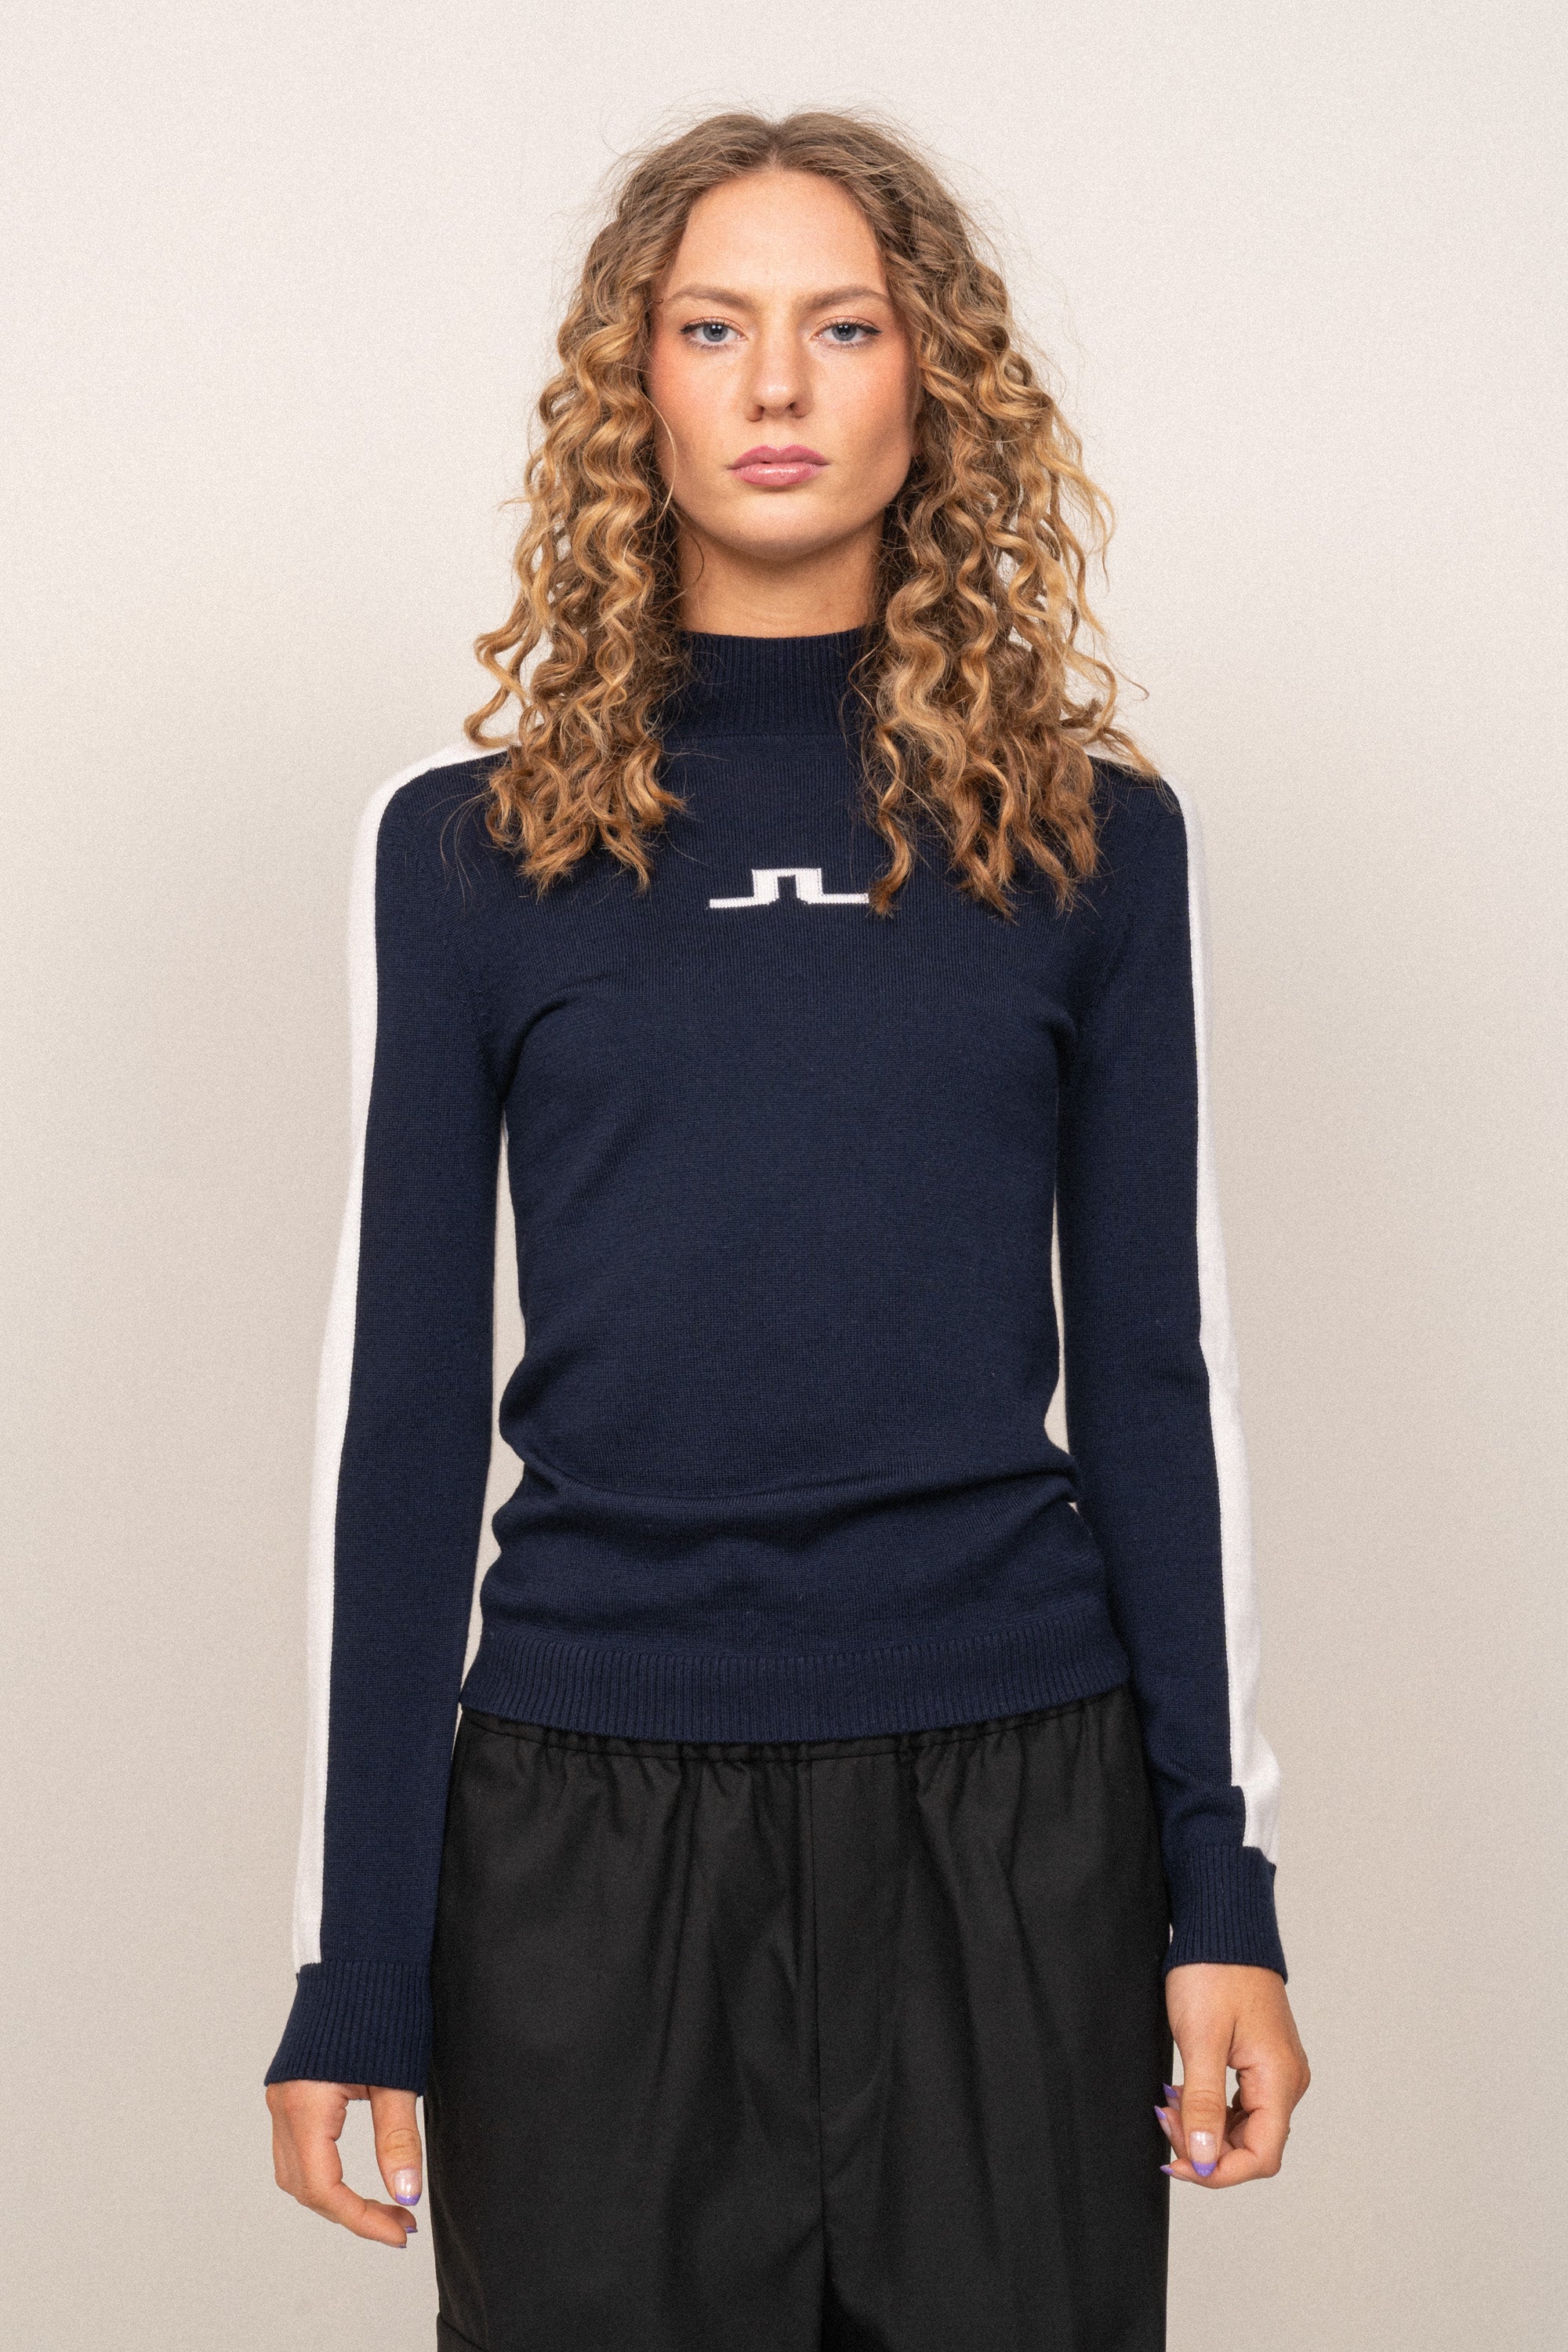 Adeline Knitted Sweater - Jl Navy